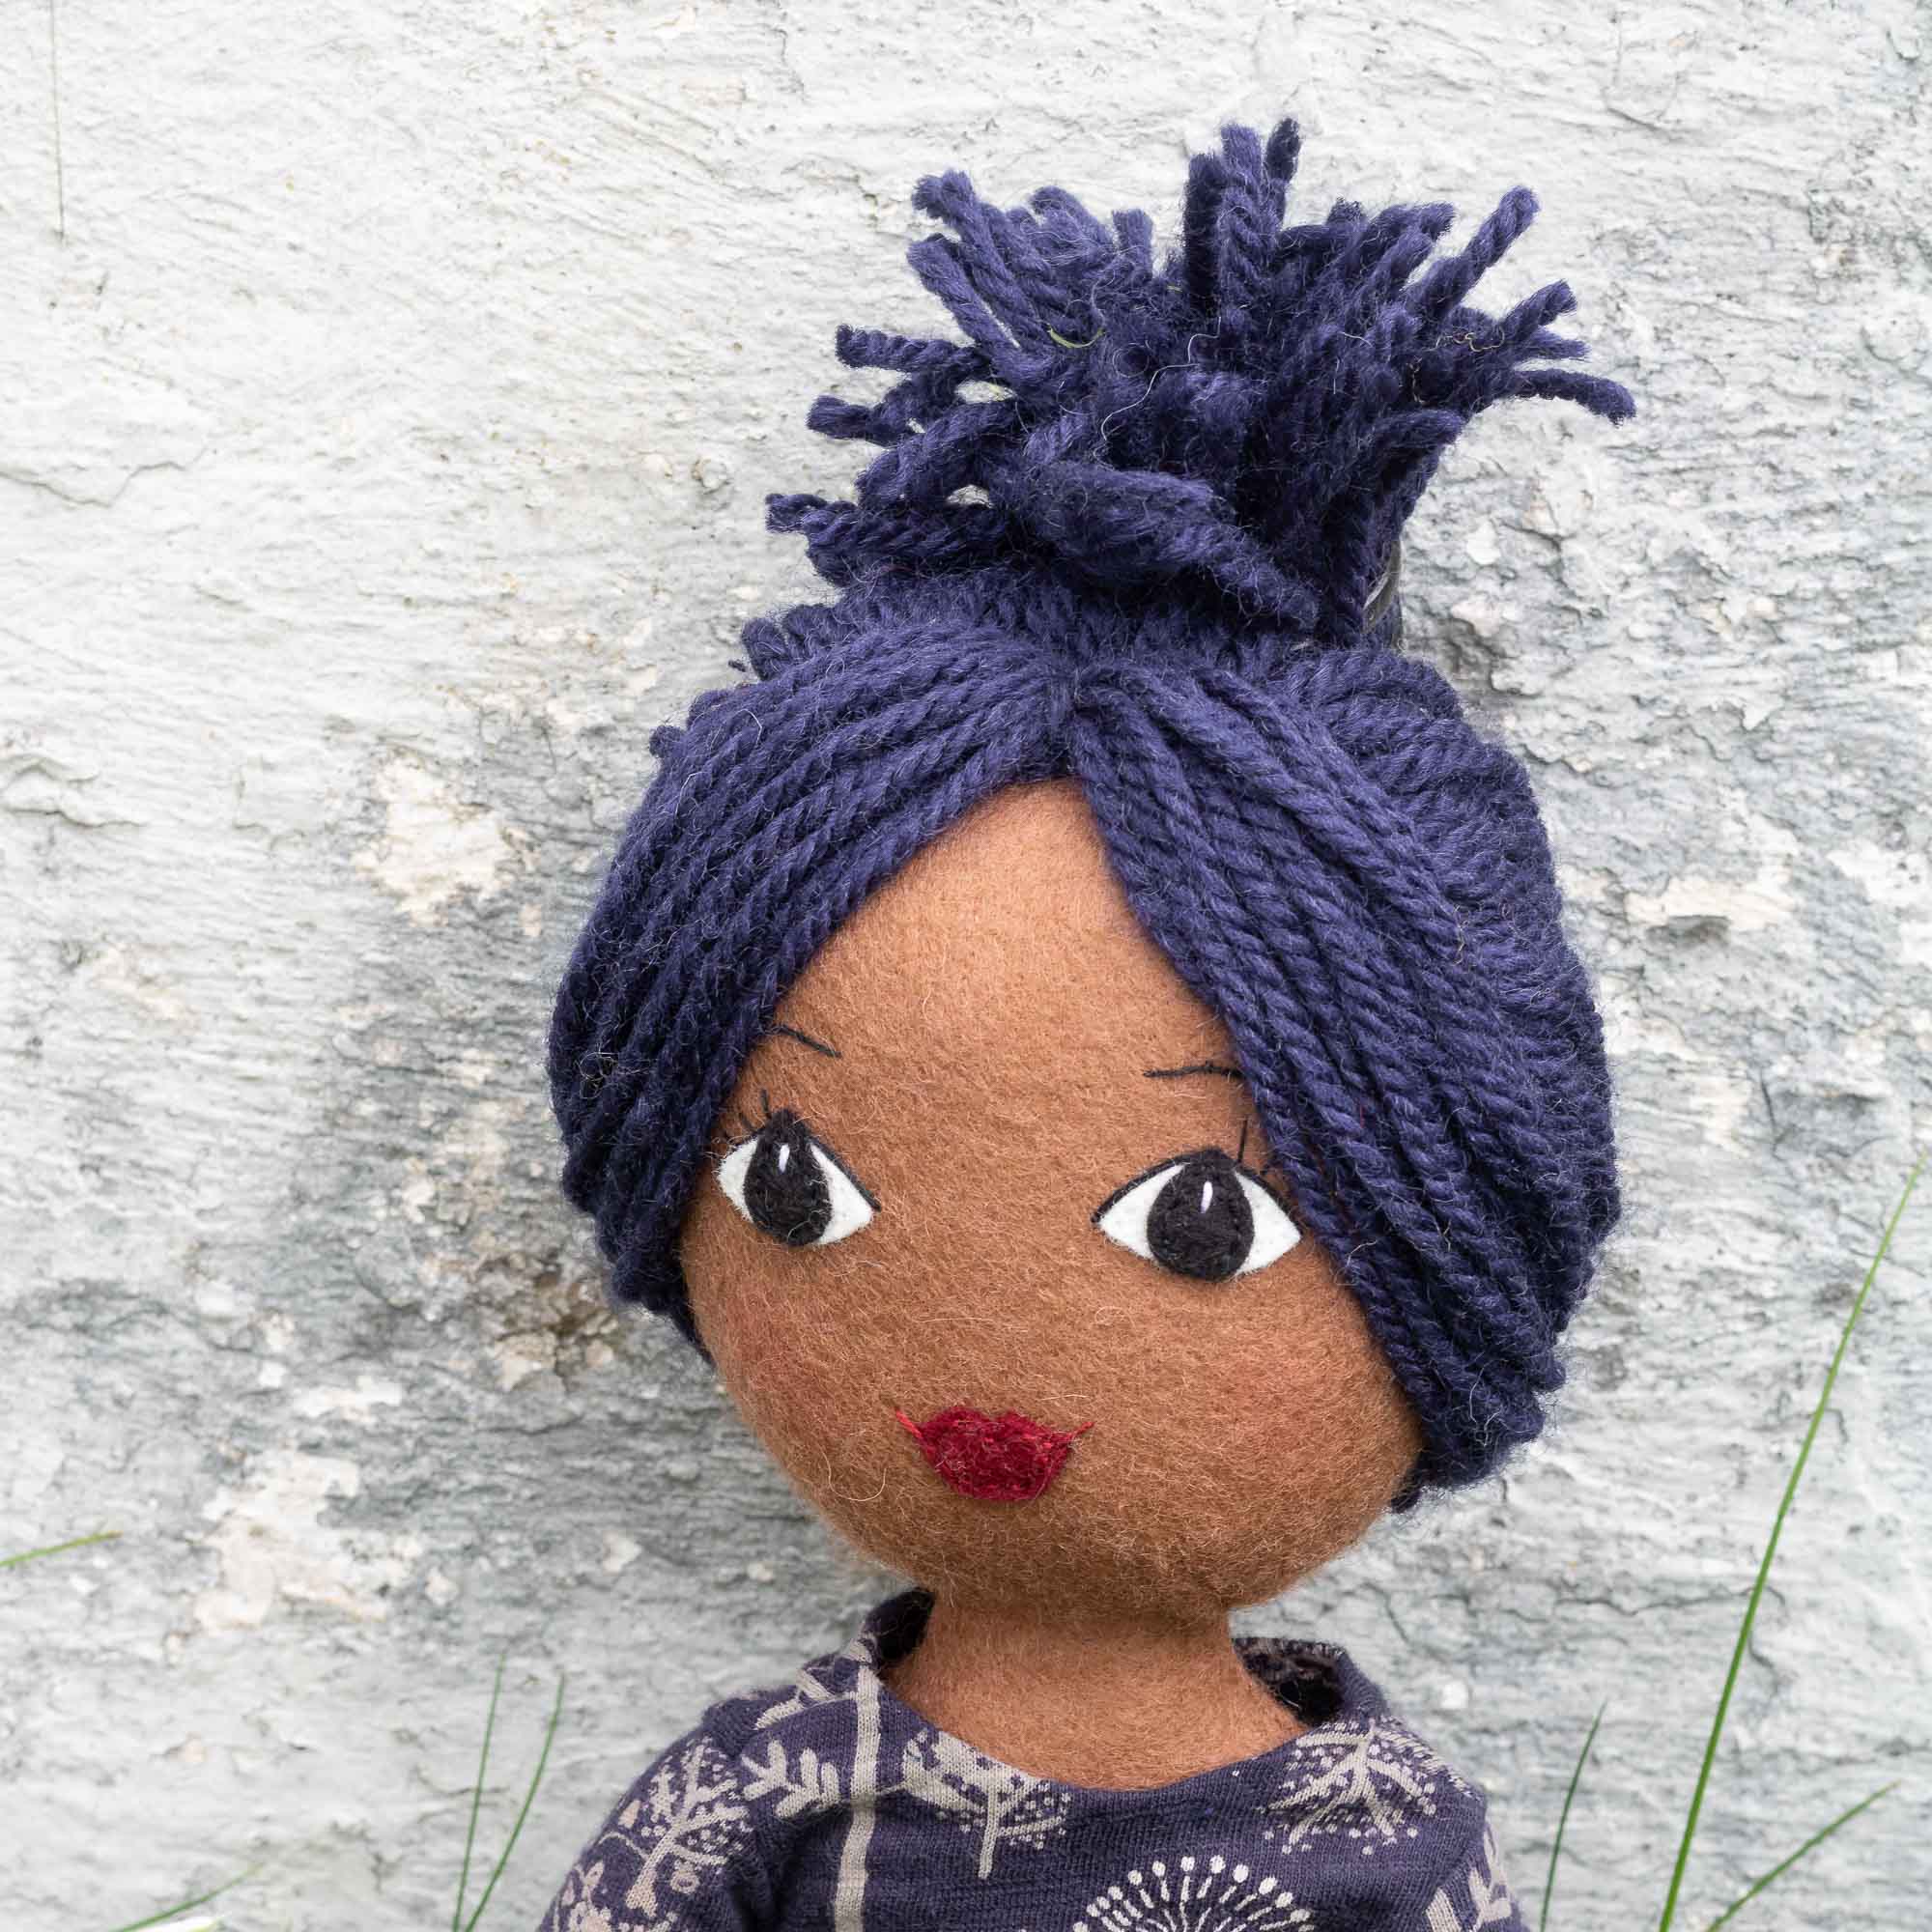 How to Make Yarn Hair for Rag Dolls (It's actually really easy!) 